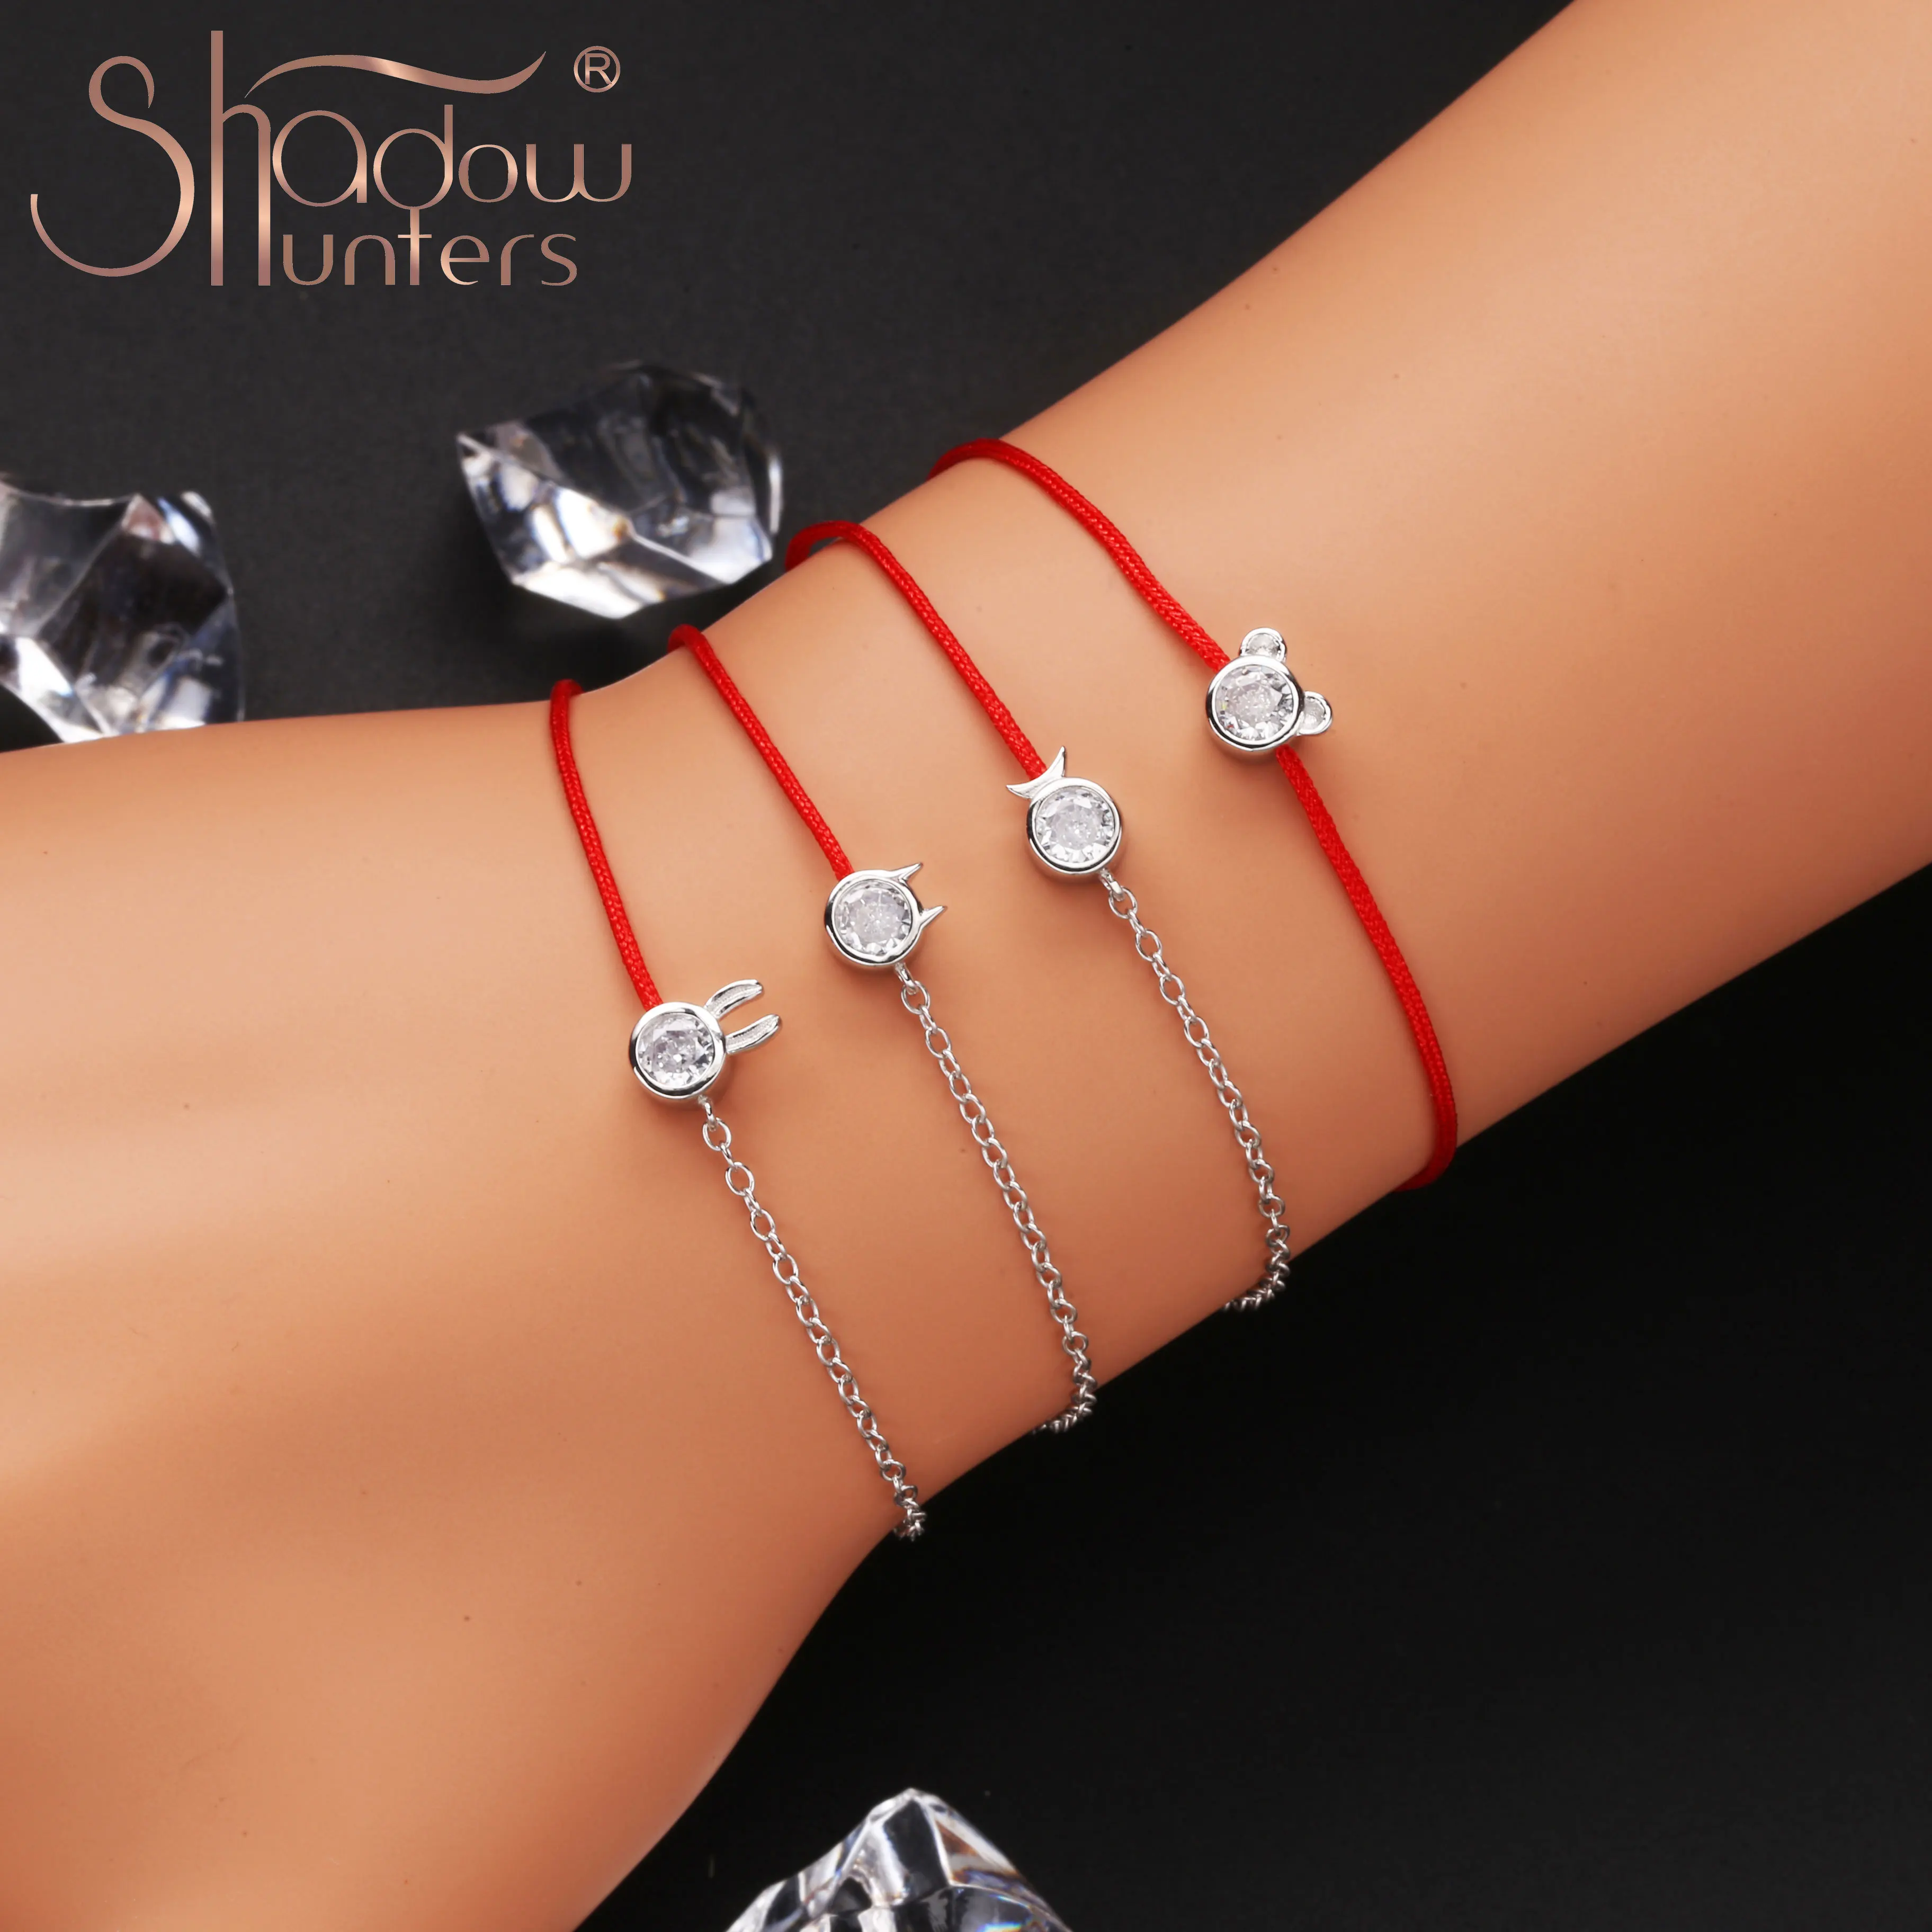 

Shadowhunters 925 Sterling Silver Small Cz Bracelet Adjustable Half Red Wire Half Silver Chain Bracelet For Women Christmas Gift